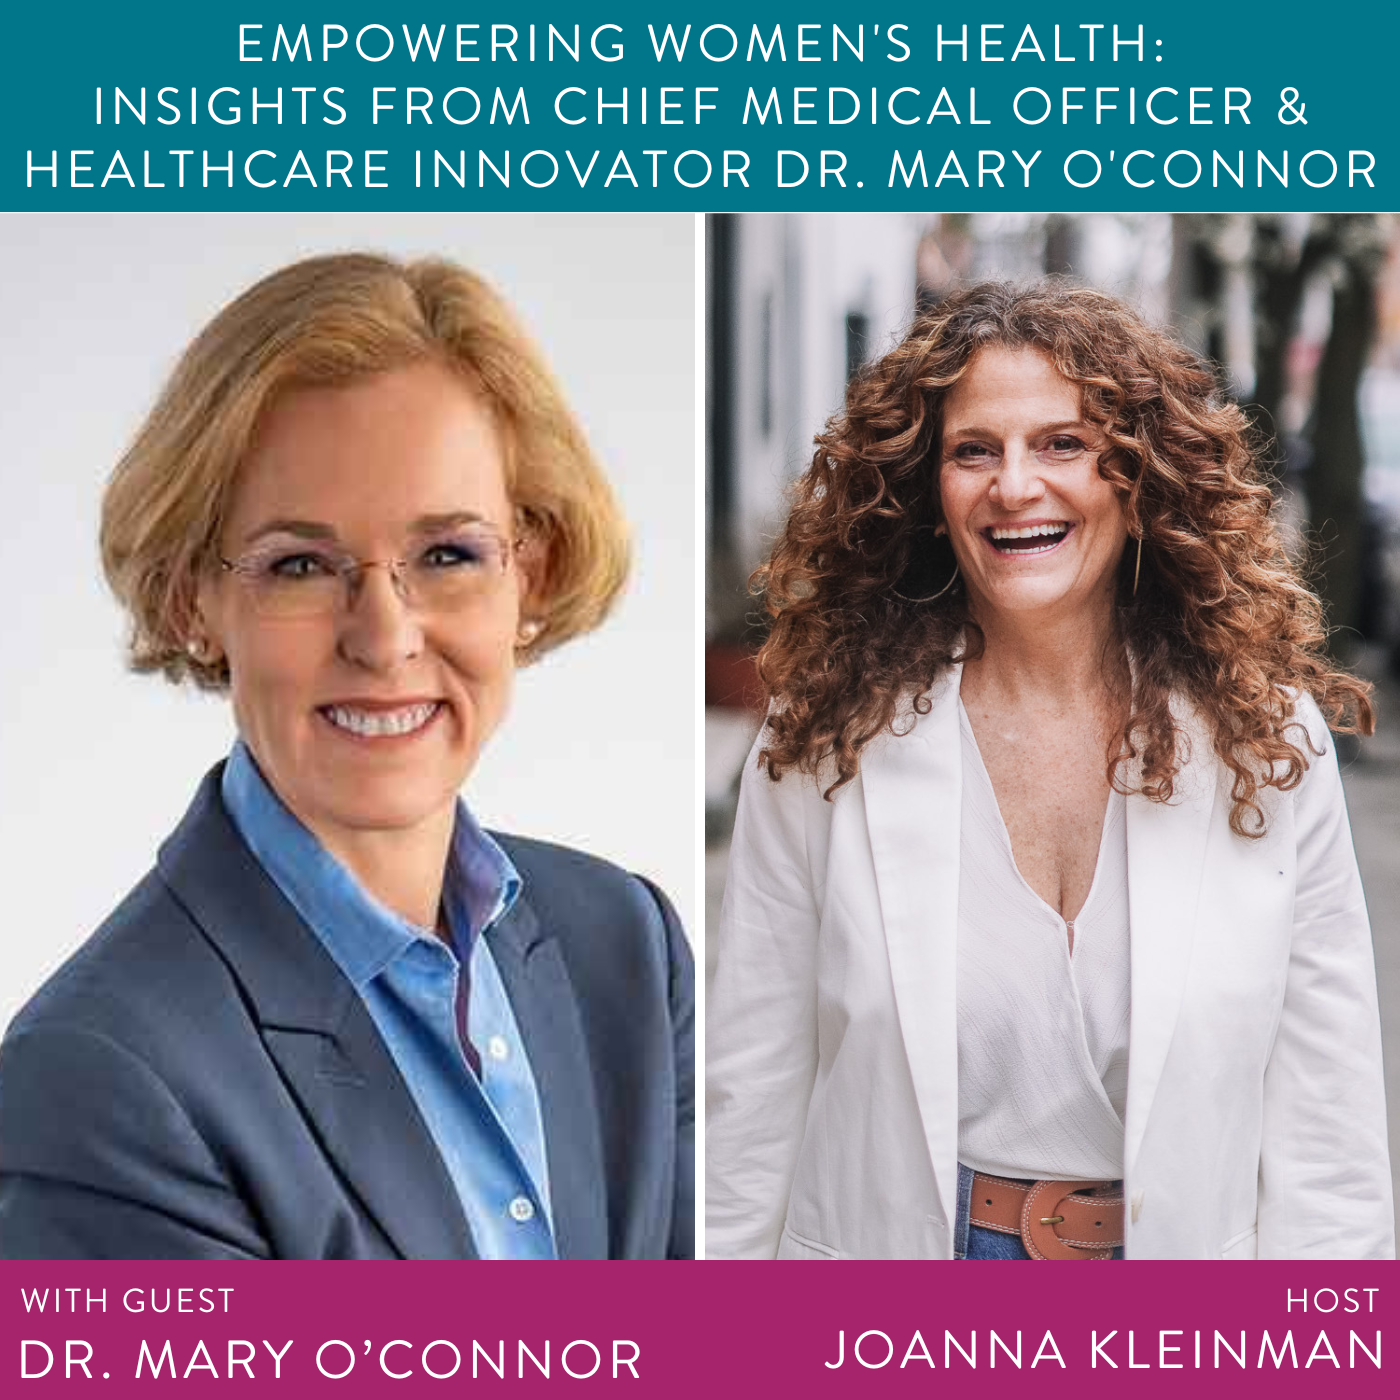 Empowering Women's Health: Insights from Chief Medical Officer & Healthcare Innovator Dr. Mary O'Connor